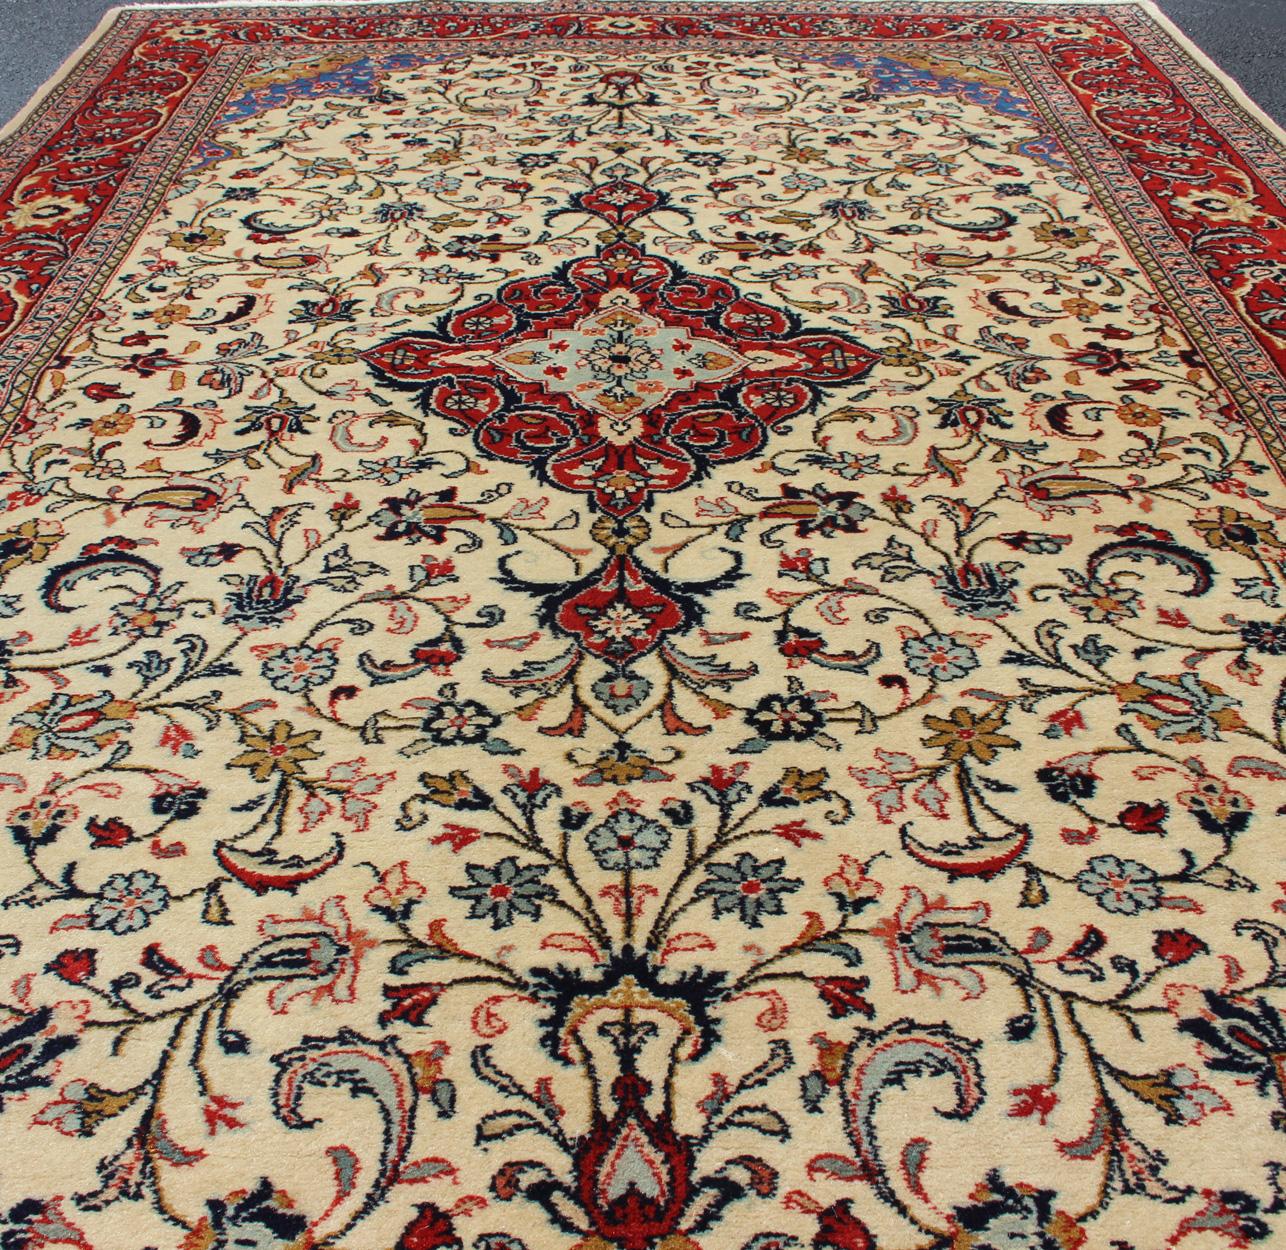 20th Century Vintage Persian Tabriz Rug with Floral Design in Cream, blue and Red